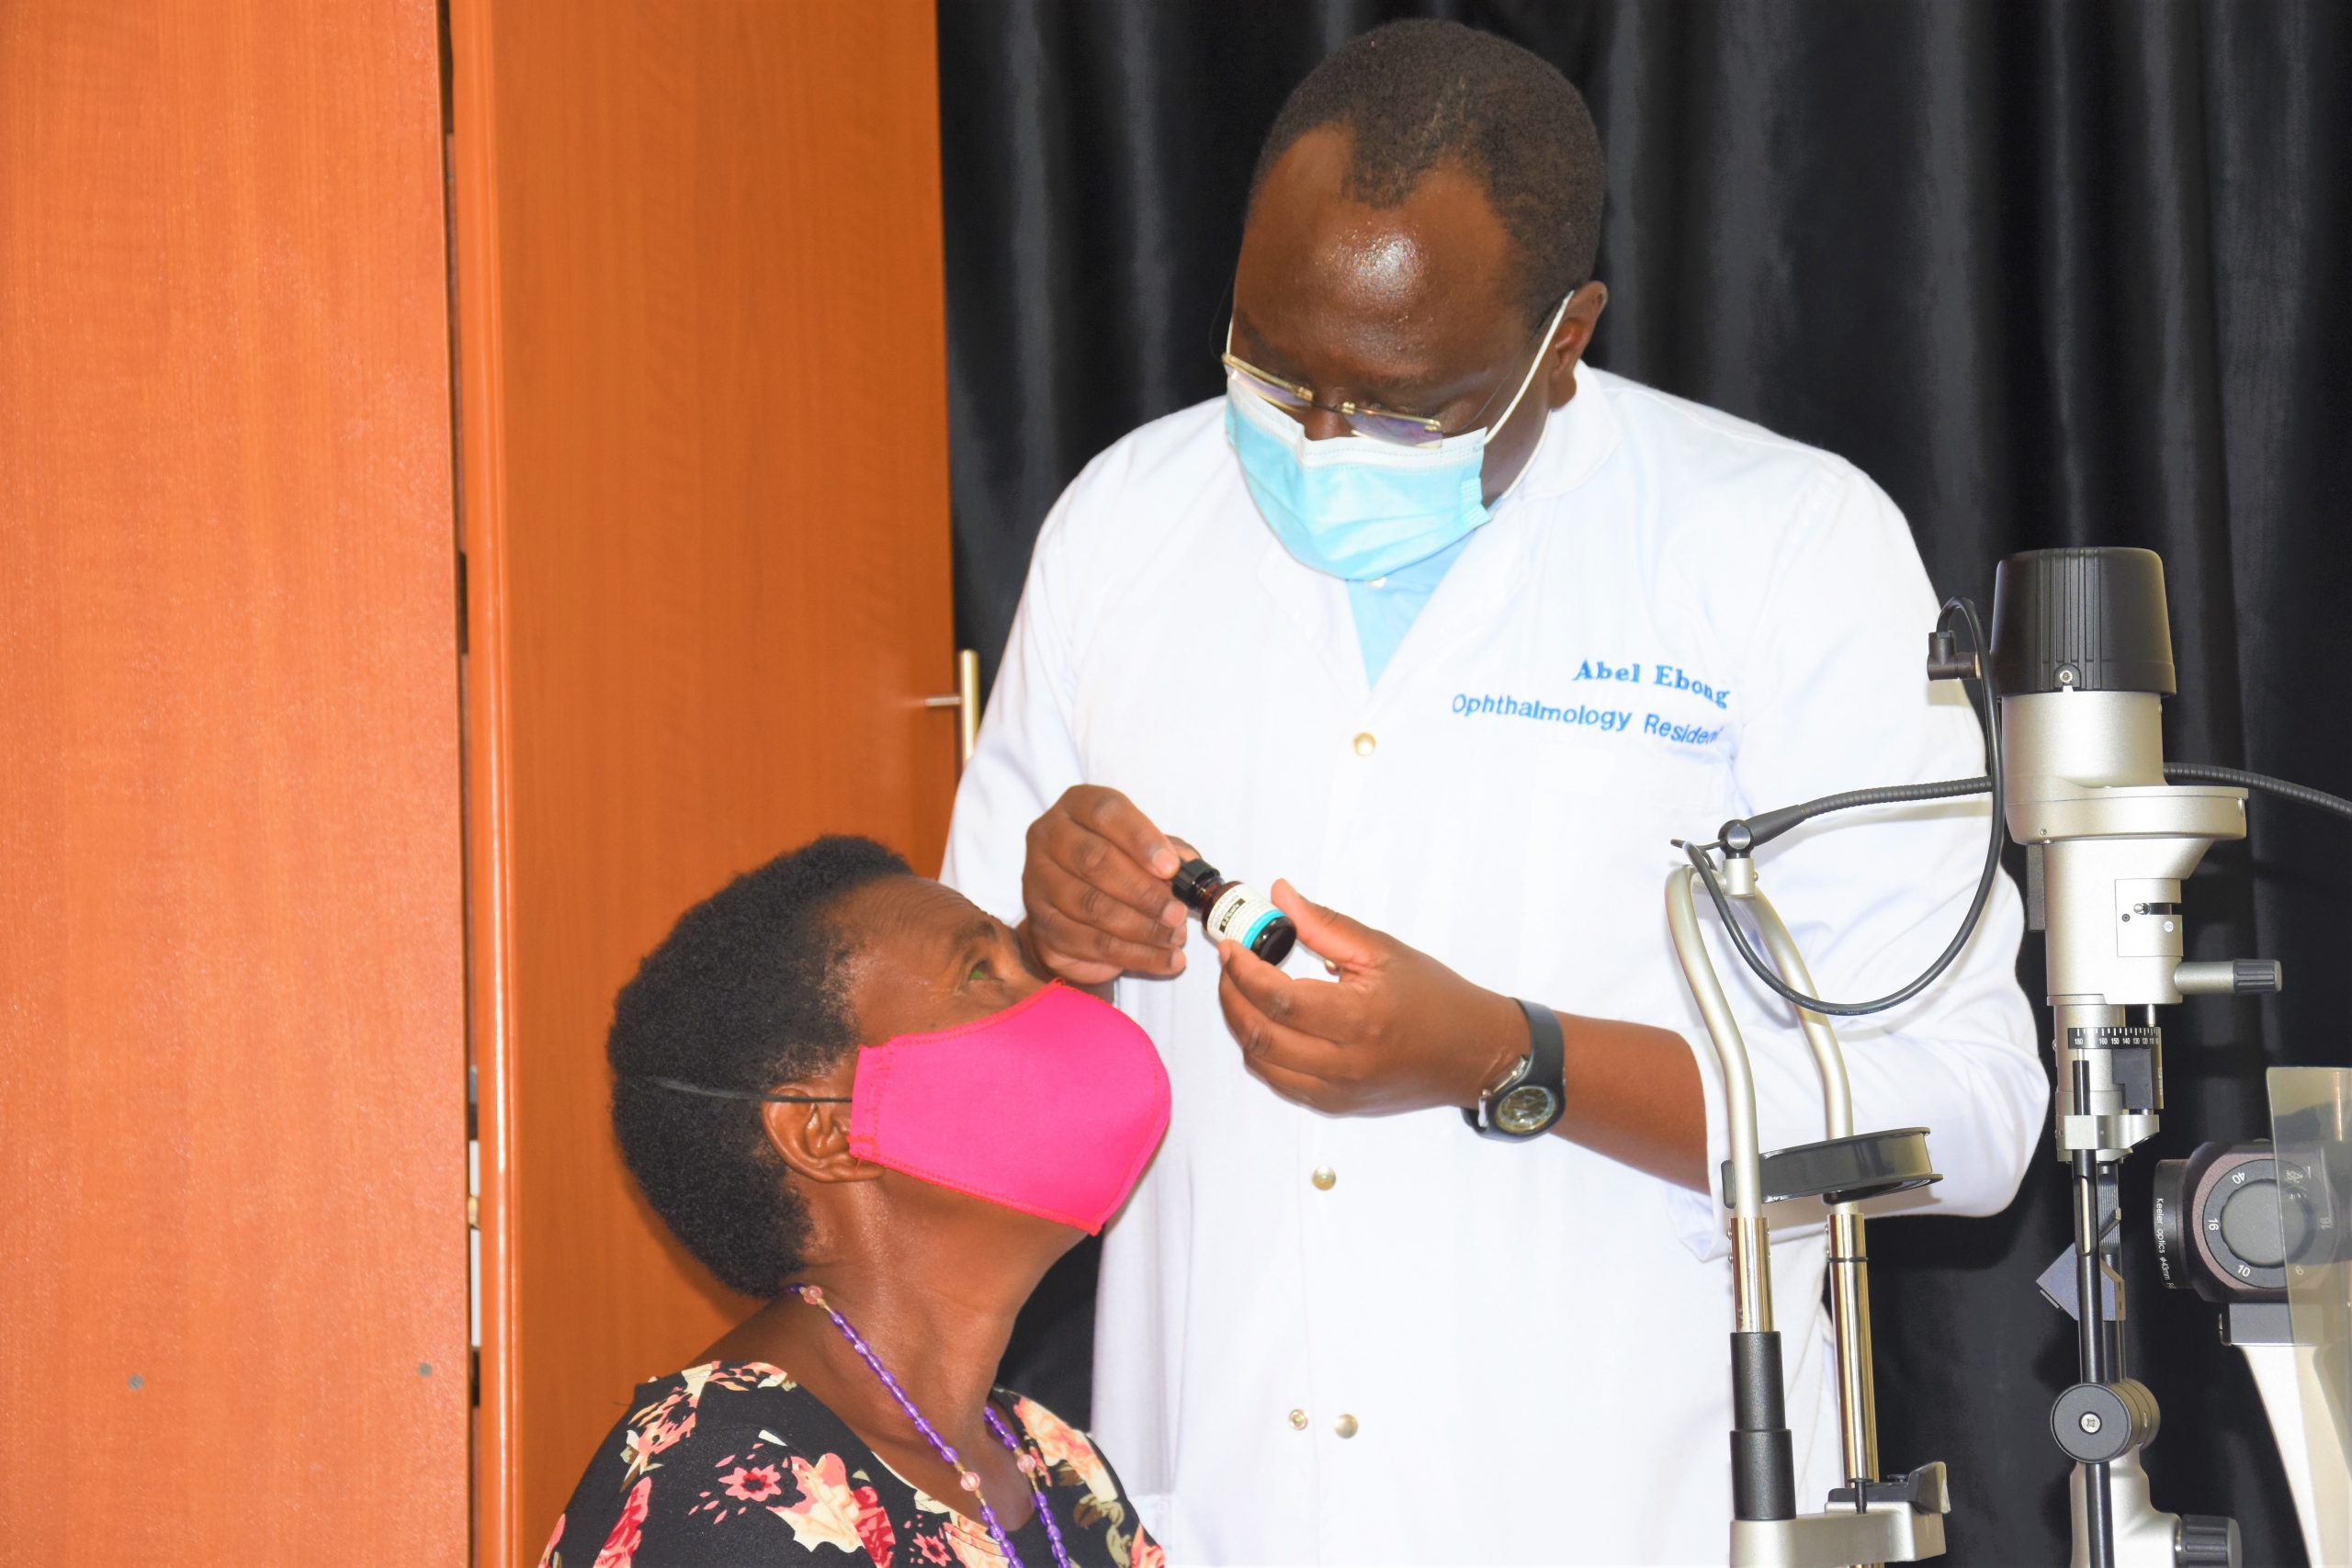 Dr Abel Ebong, one of the registrars at Mbarara University tertiary eye hospital in Uganda administers Chlorhexidine eye drops to a patient with Fungal Keratitis. Image: Simon Arunga